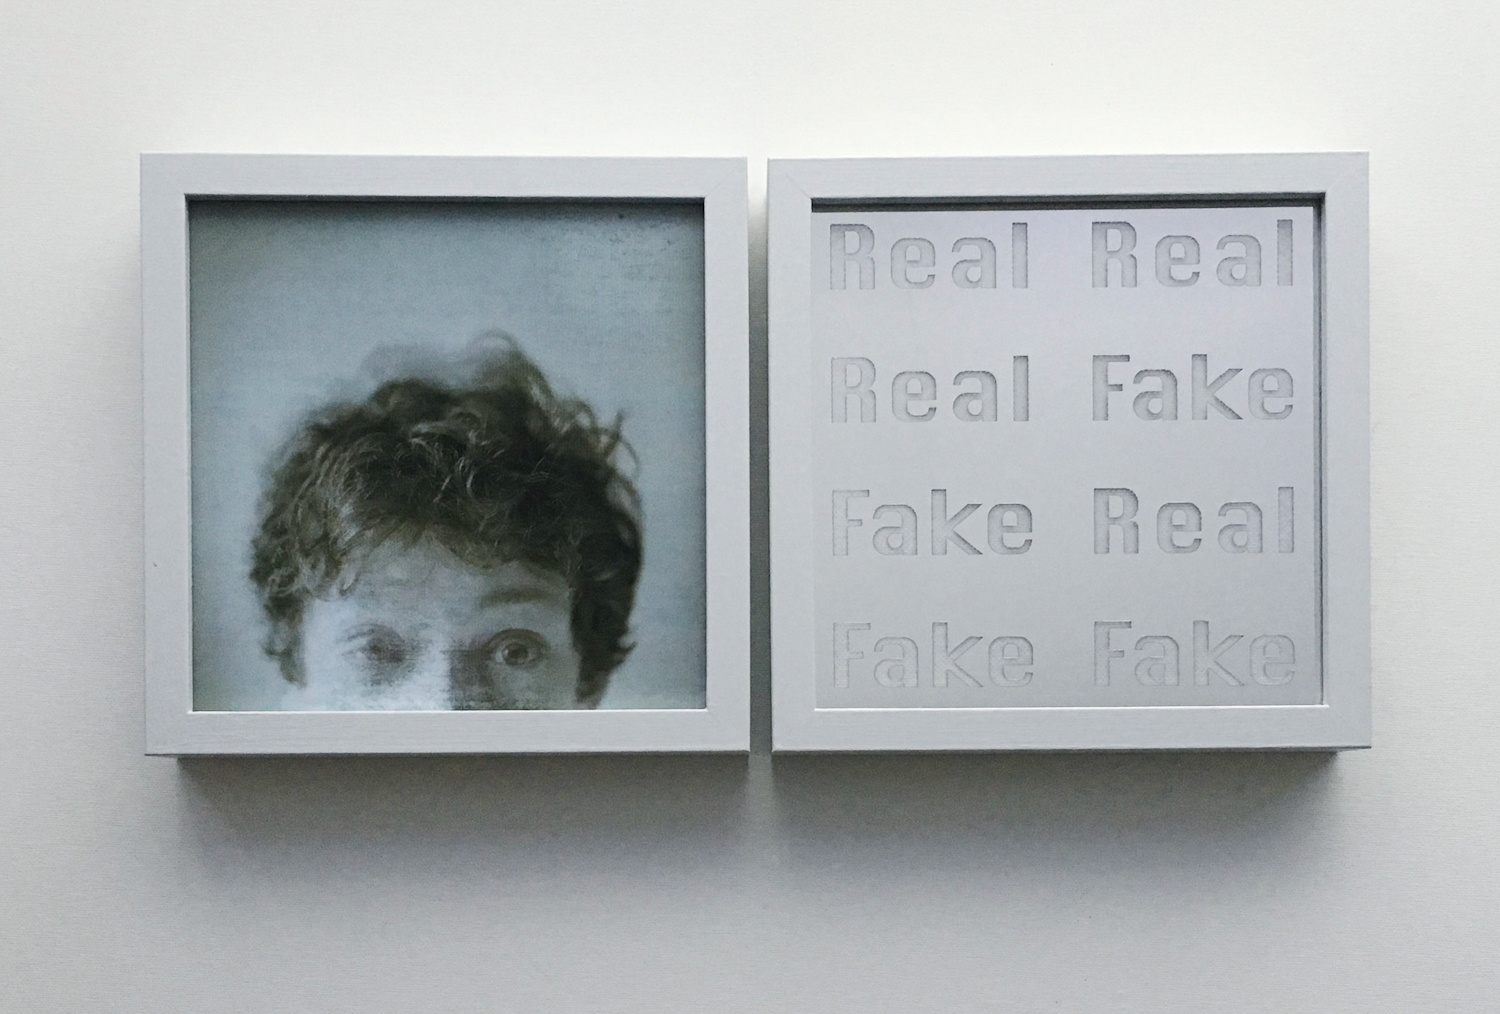 An image of the two exhibition pieces on the wall in frames